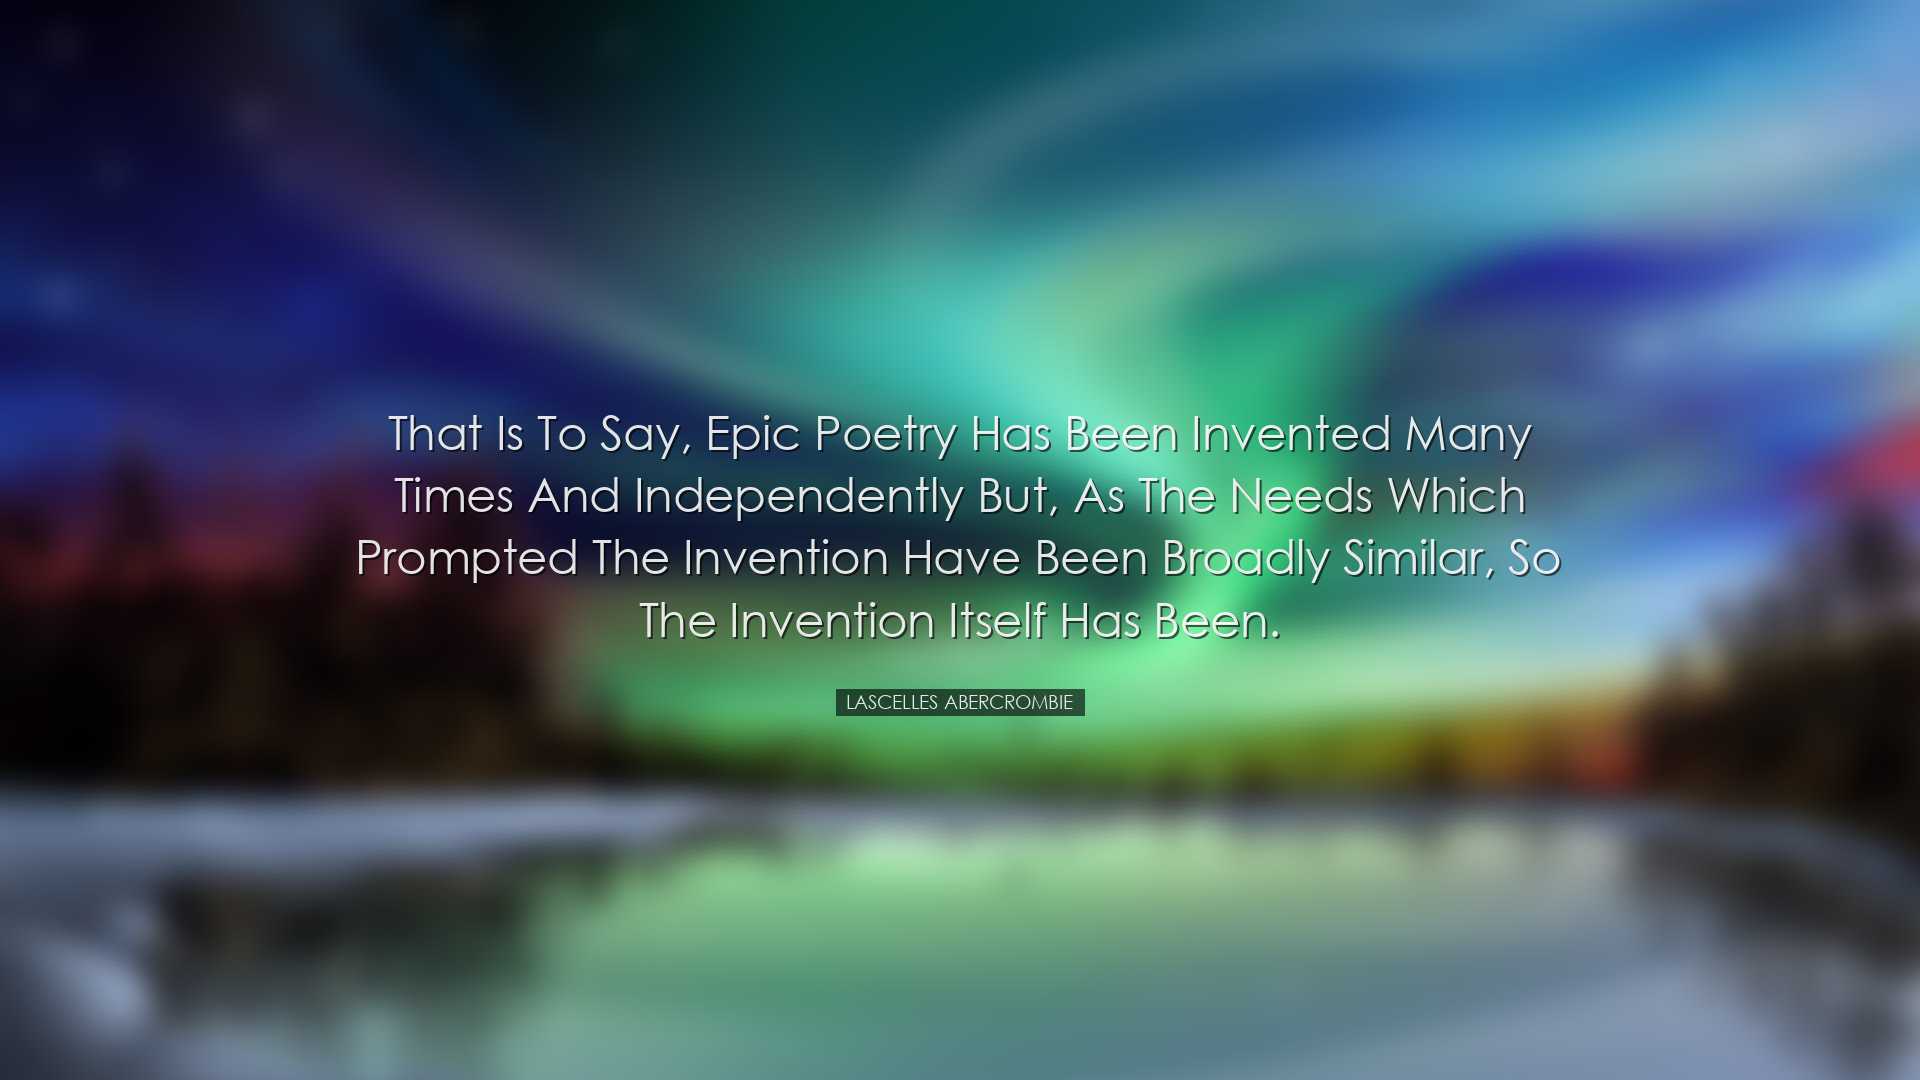 That is to say, epic poetry has been invented many times and indep